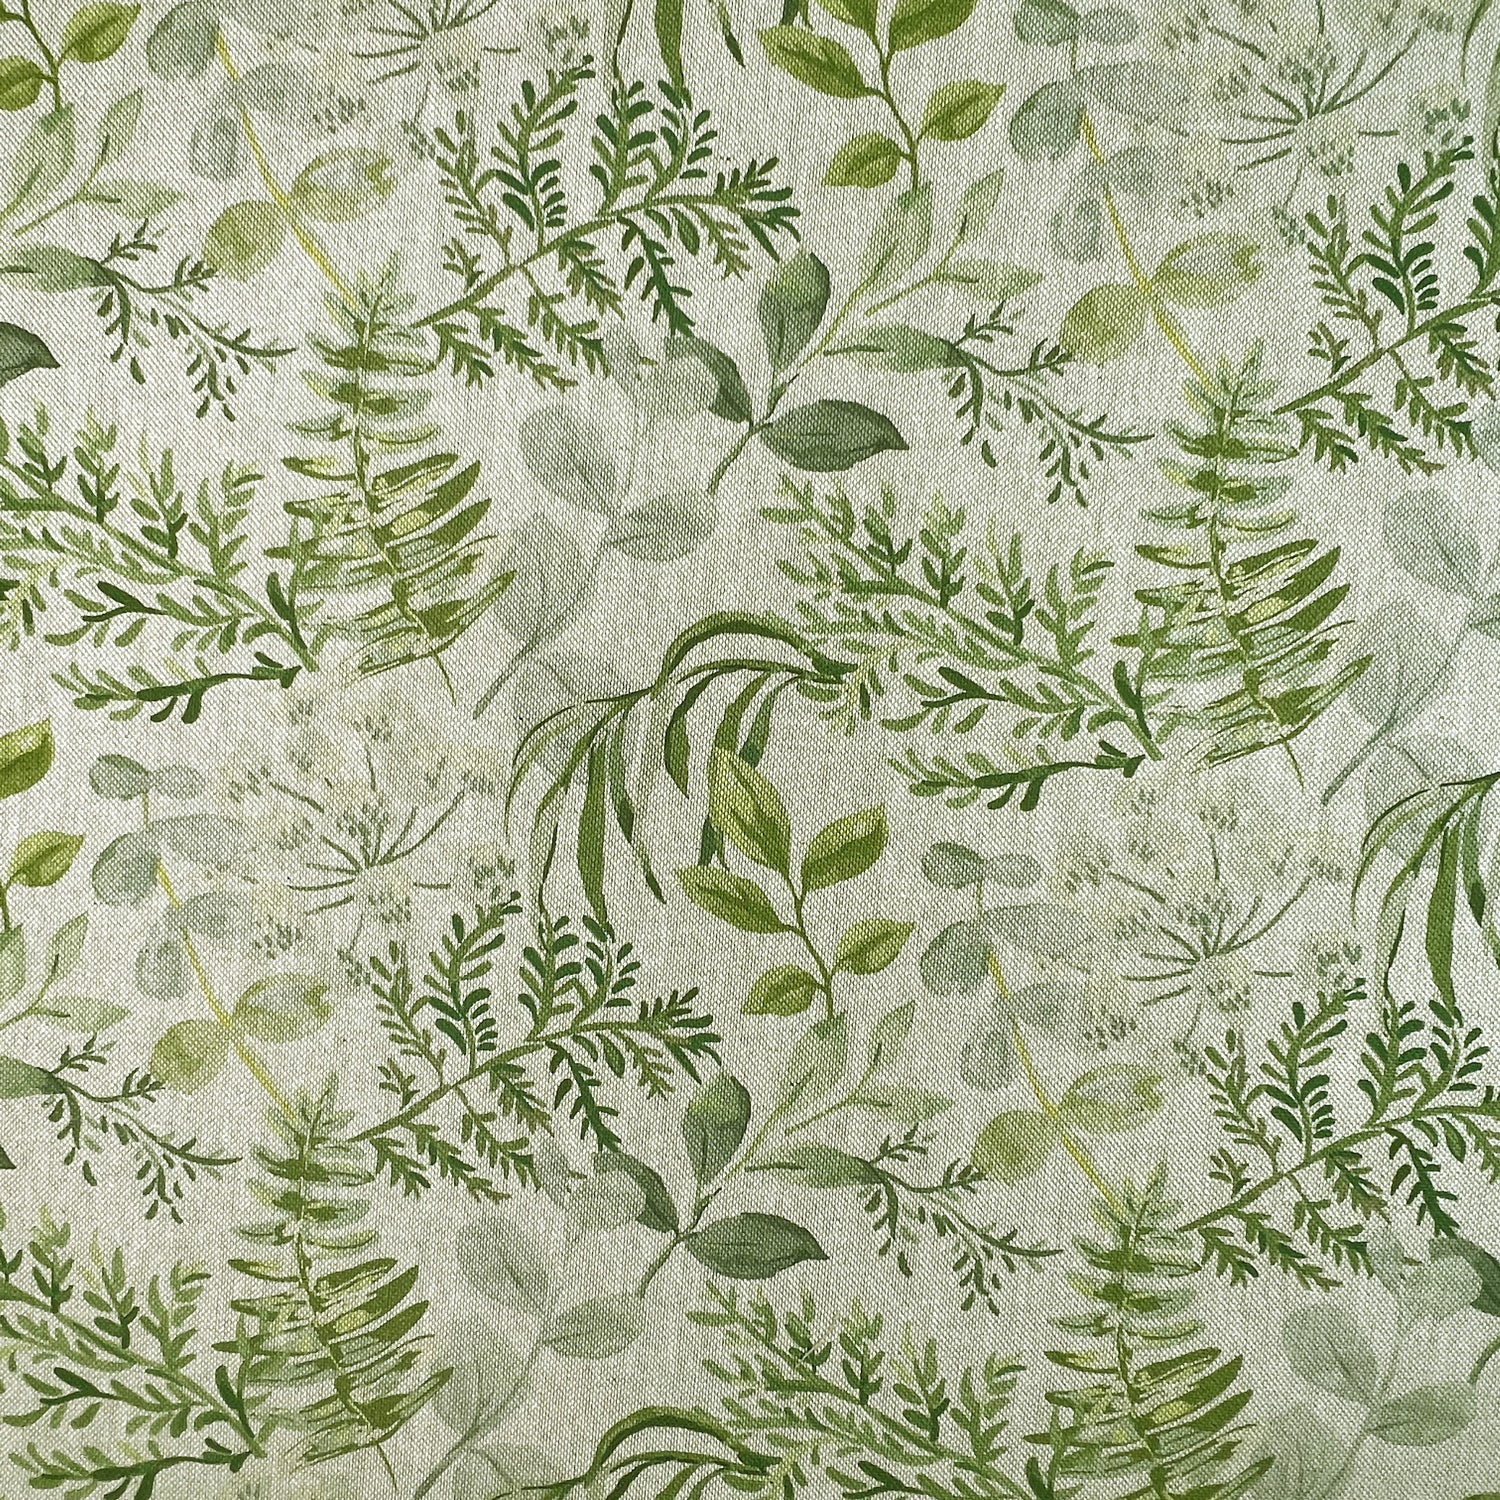 Upholstery Fabric - Cotton Rich Linen Look Material - Green & Grey